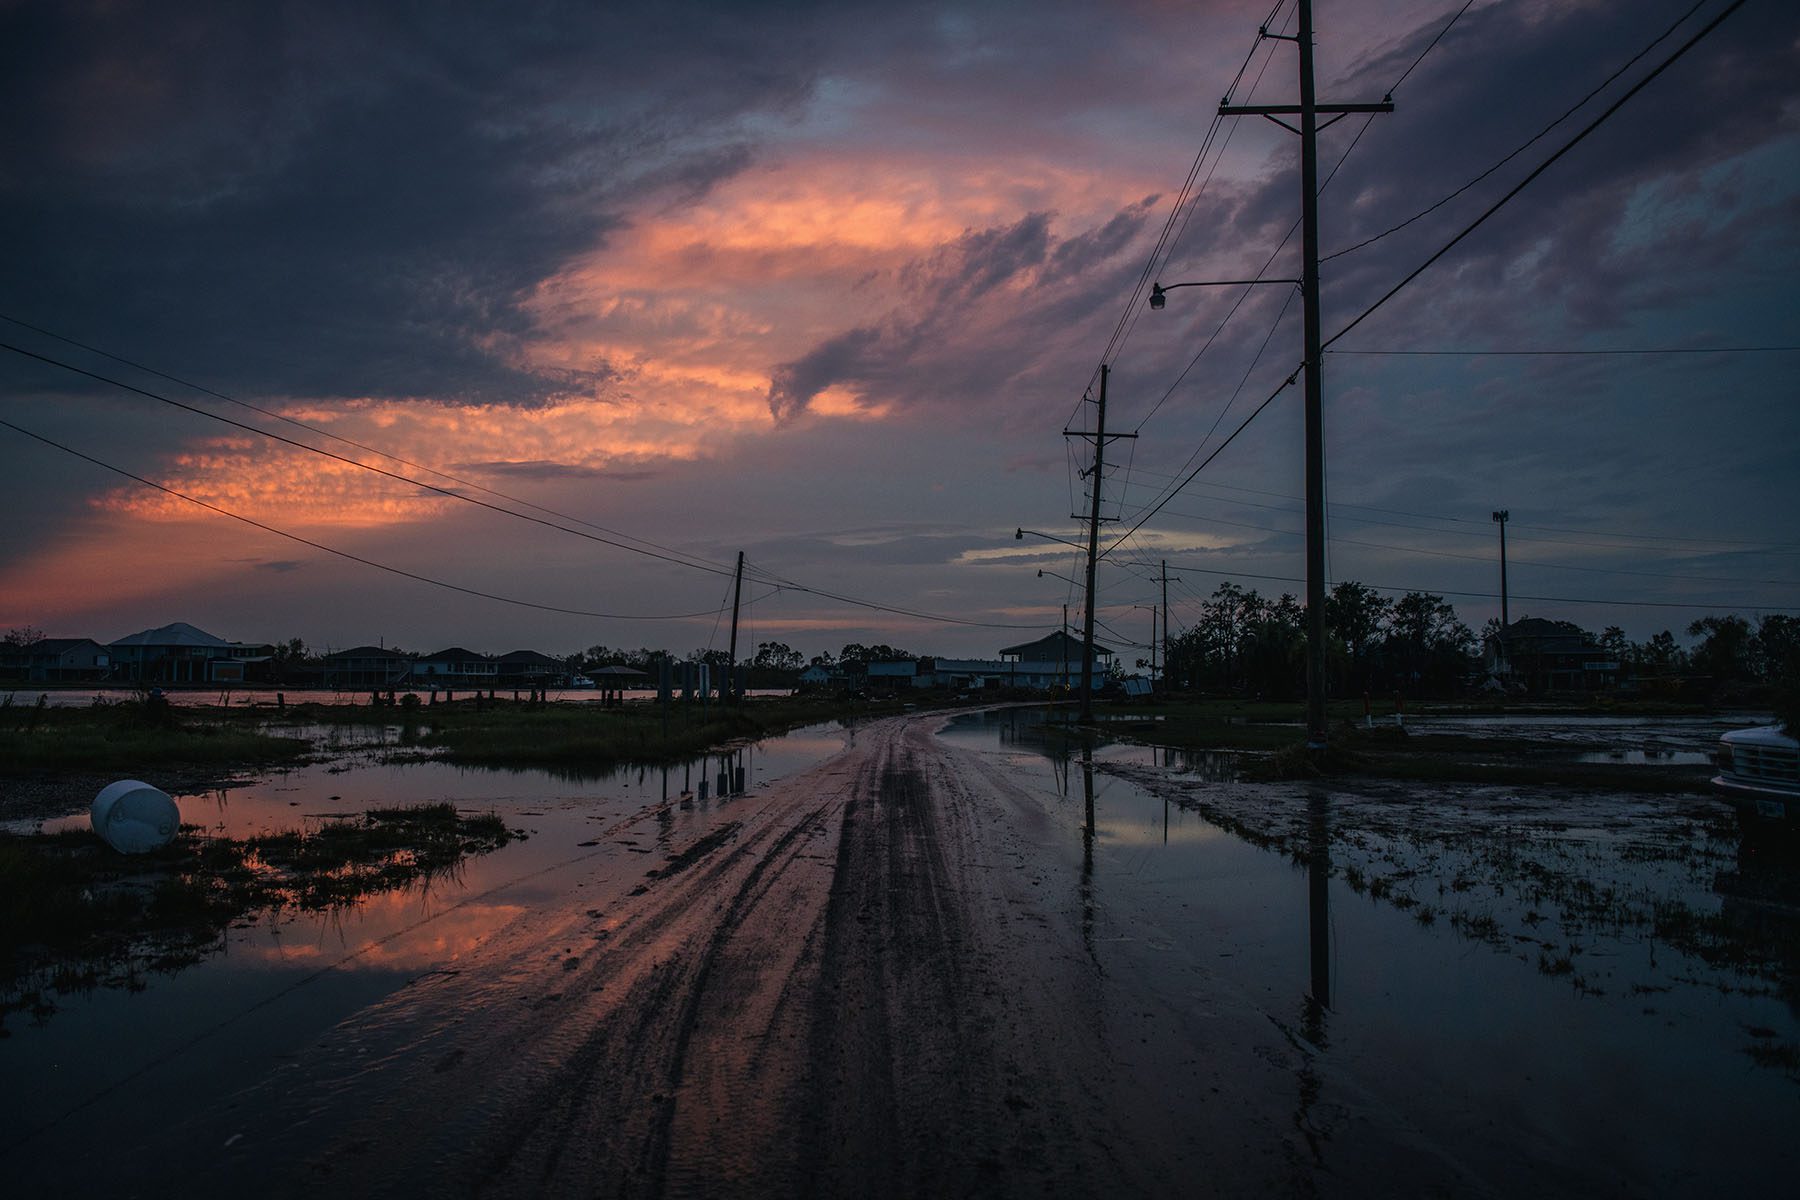 The reflection of a colorful sunset is seen on a flooded road.